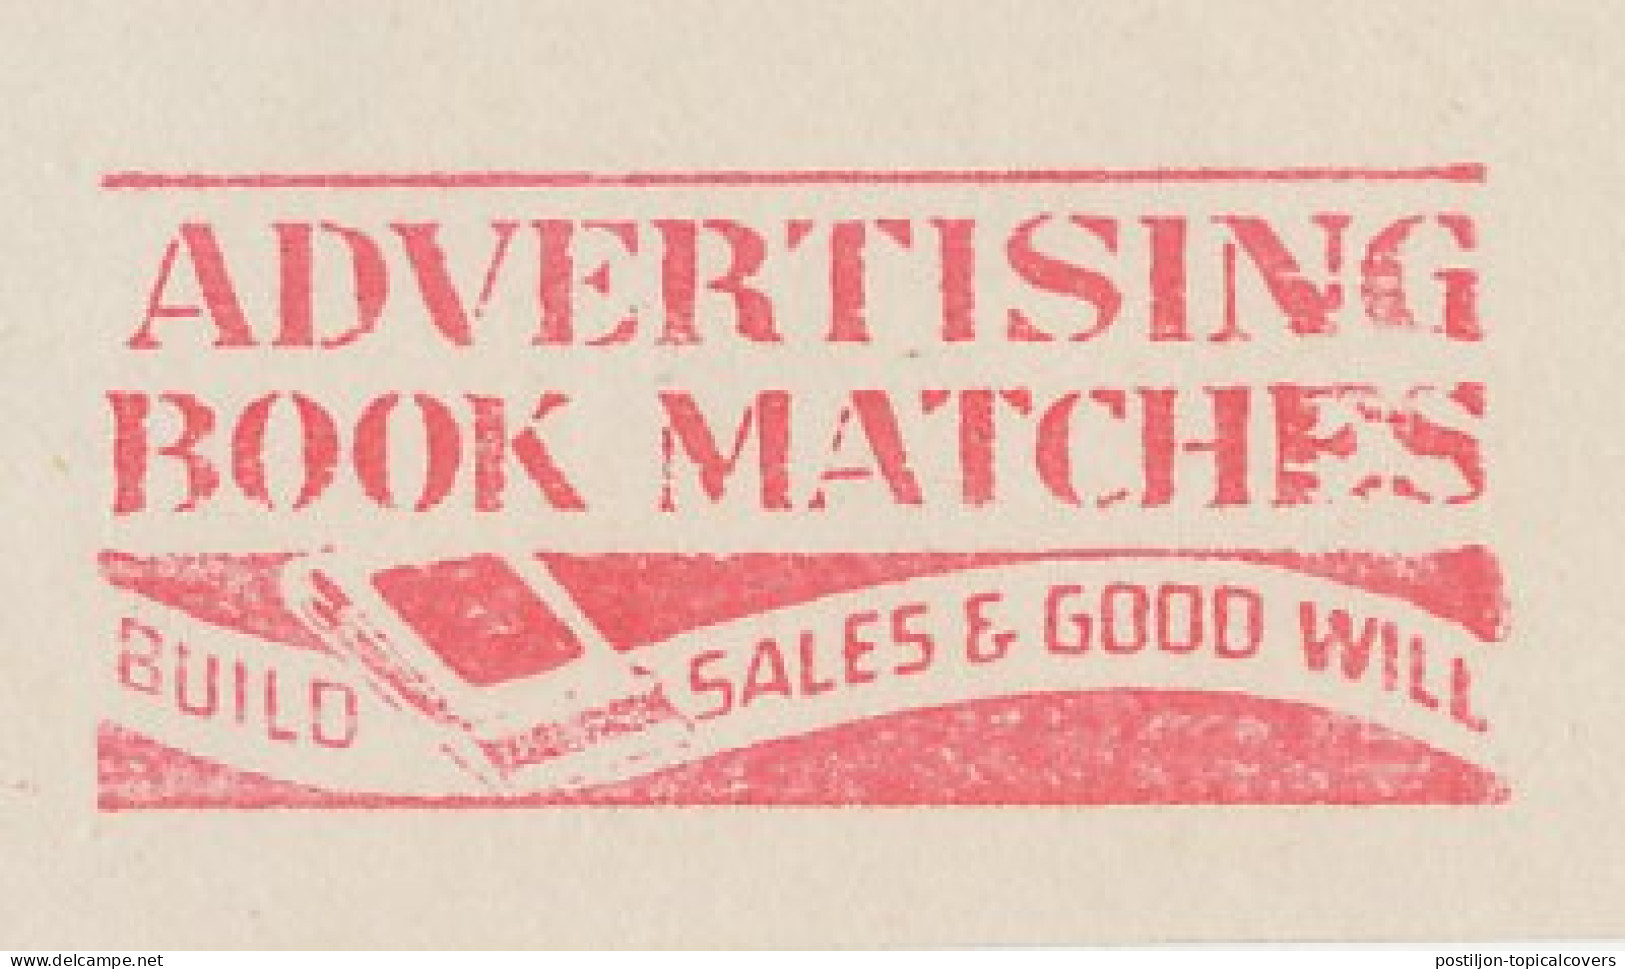 Meter Top Cut USA Book Matches - Advertising - Sapeurs-Pompiers